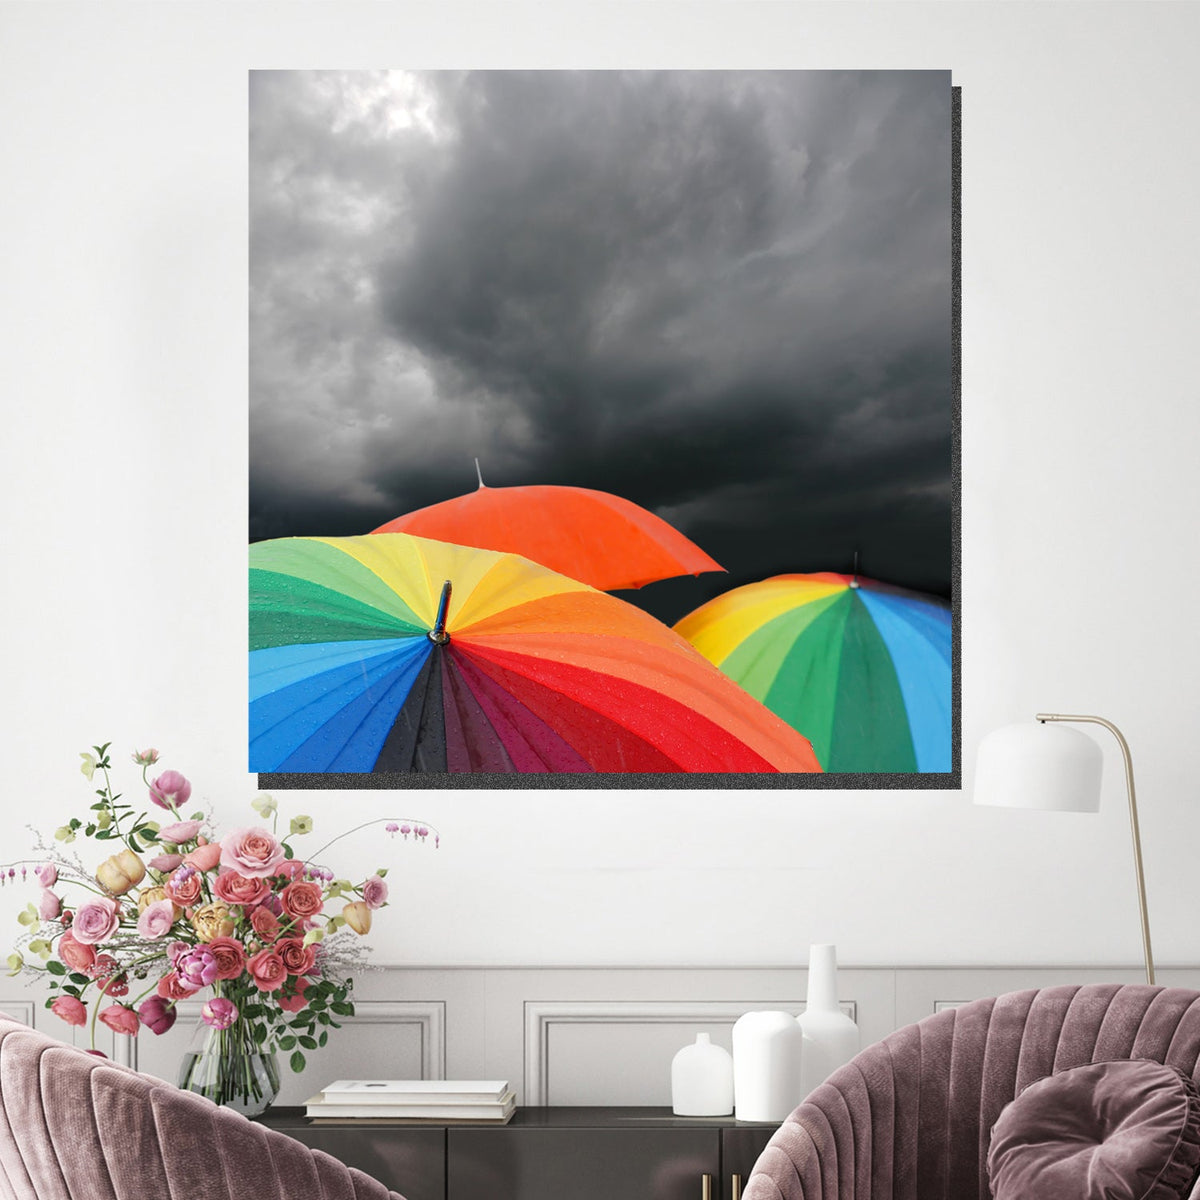 https://cdn.shopify.com/s/files/1/0387/9986/8044/products/RainbowShowerCanvasArtprintStretched-4.jpg